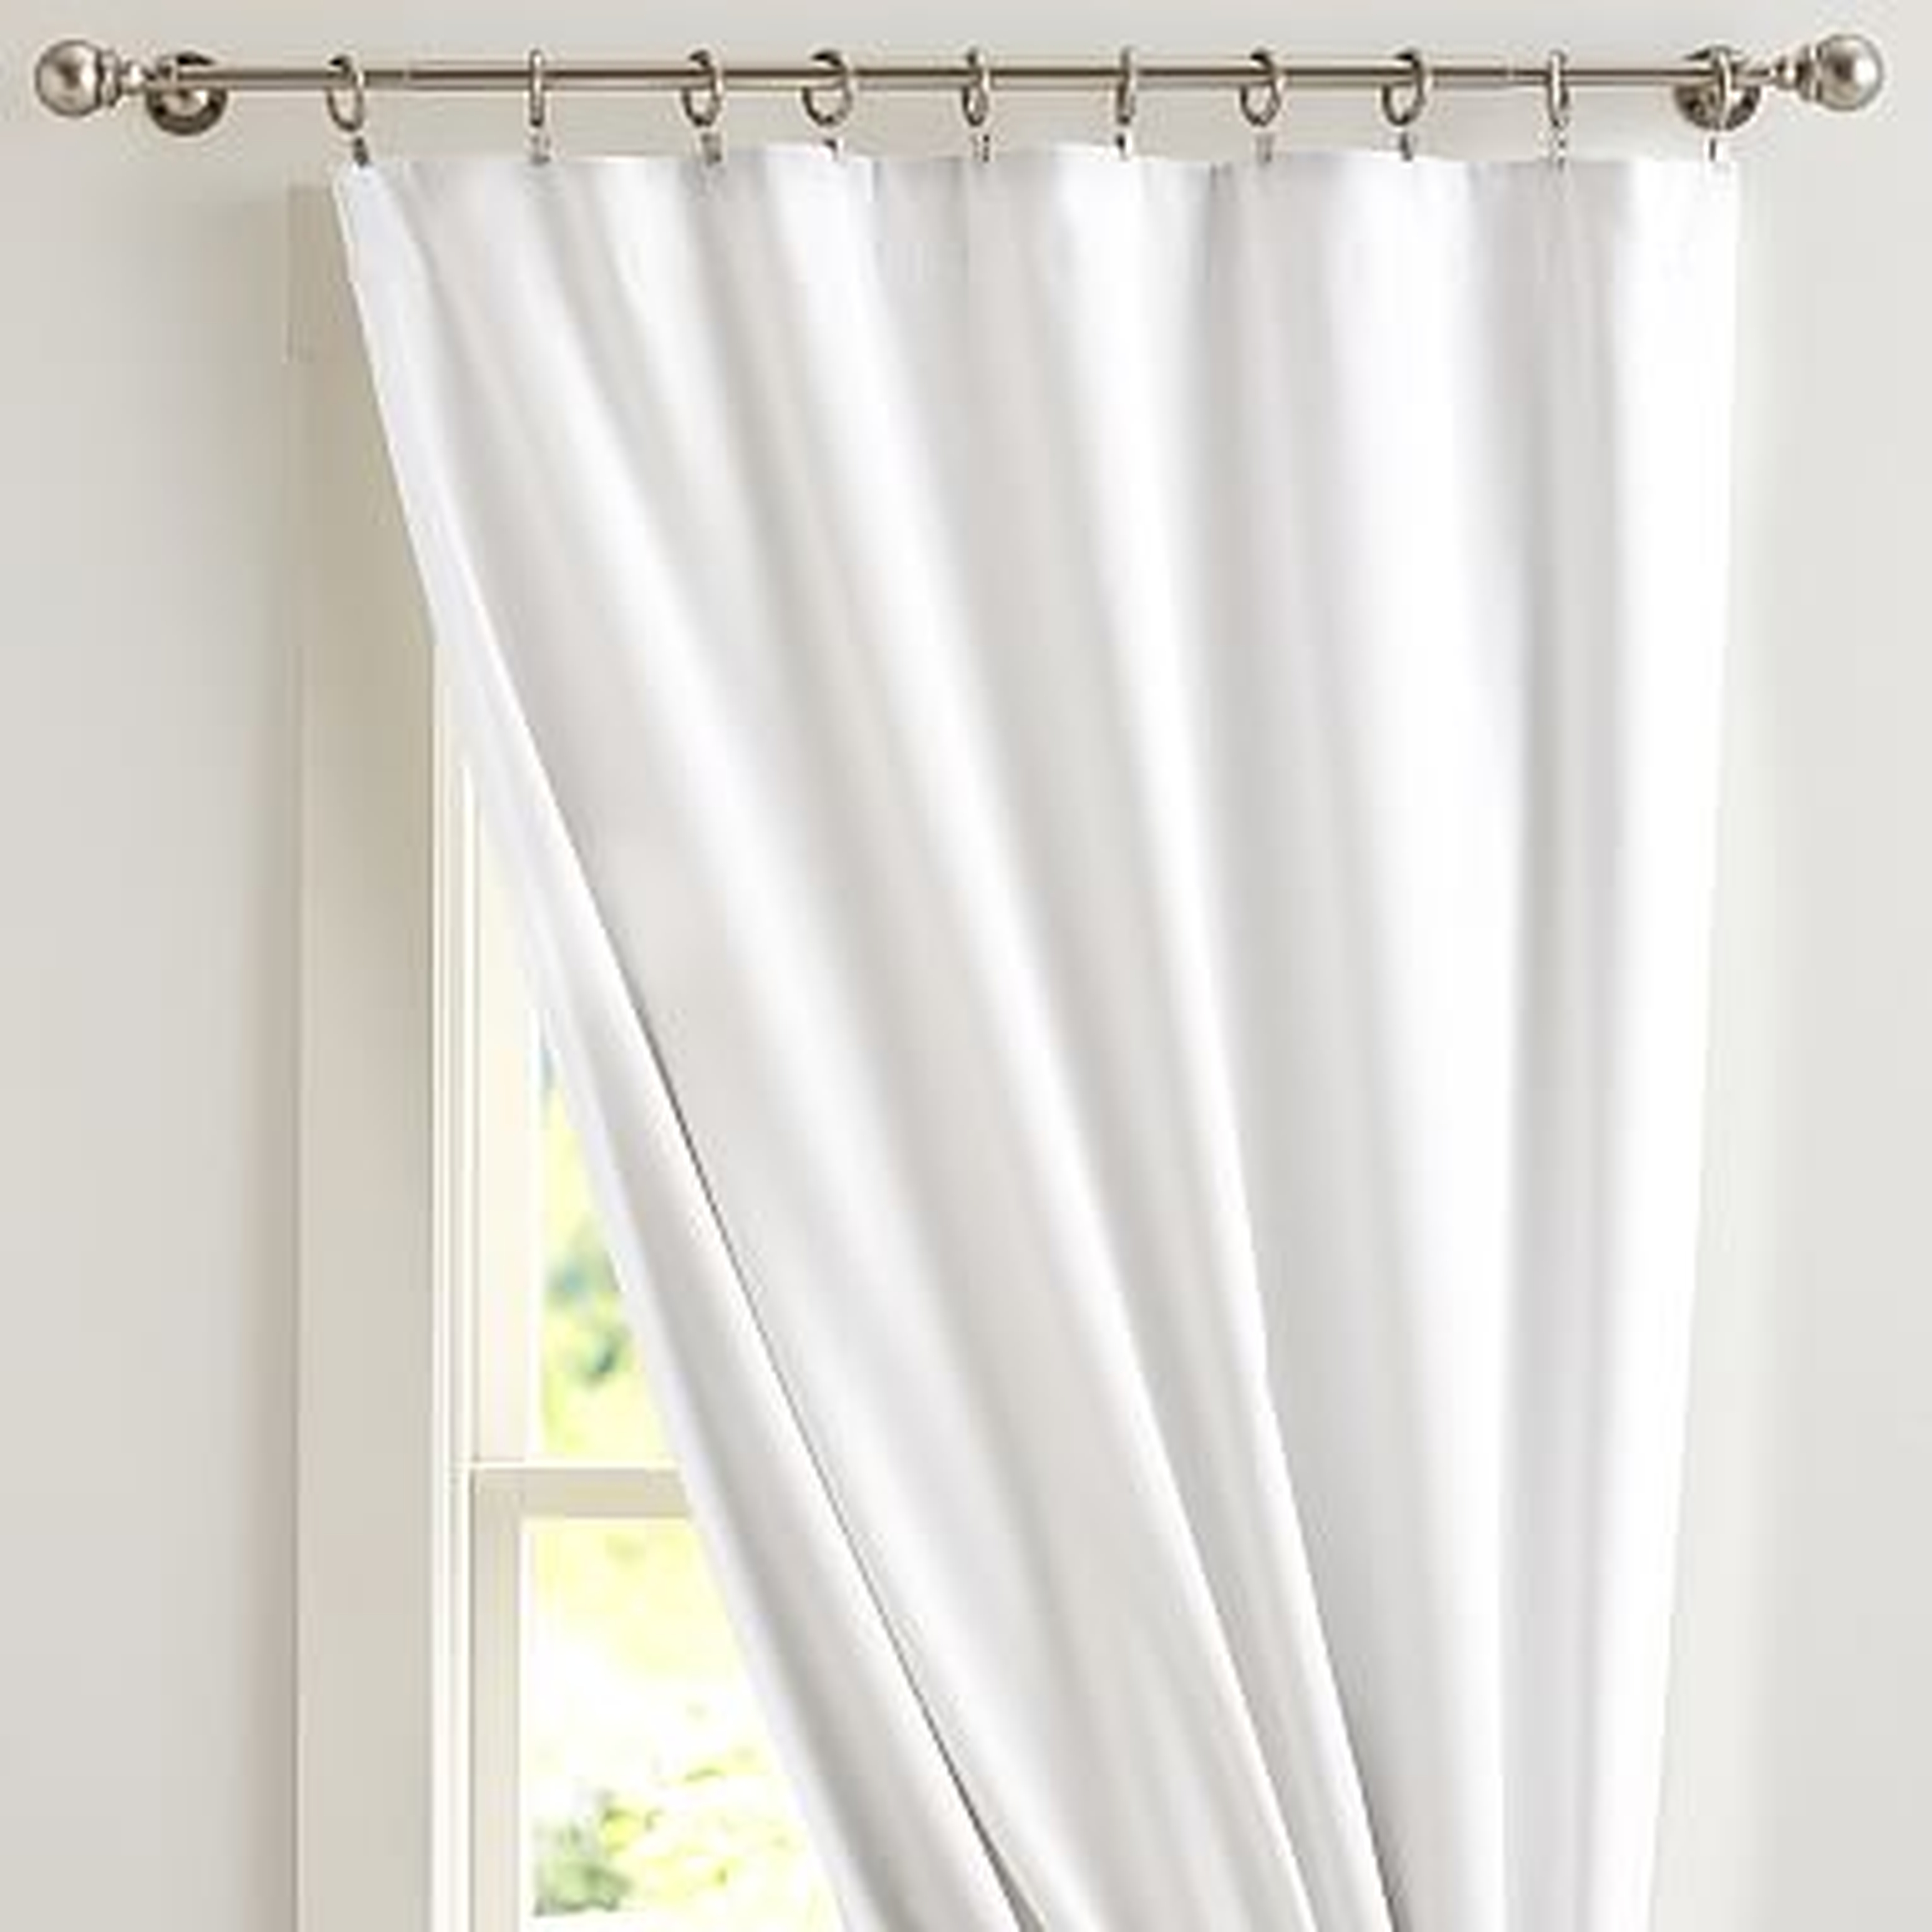 Classic Sailcloth Blackout Curtain Panel, 84", White, Set of 2 - Pottery Barn Teen